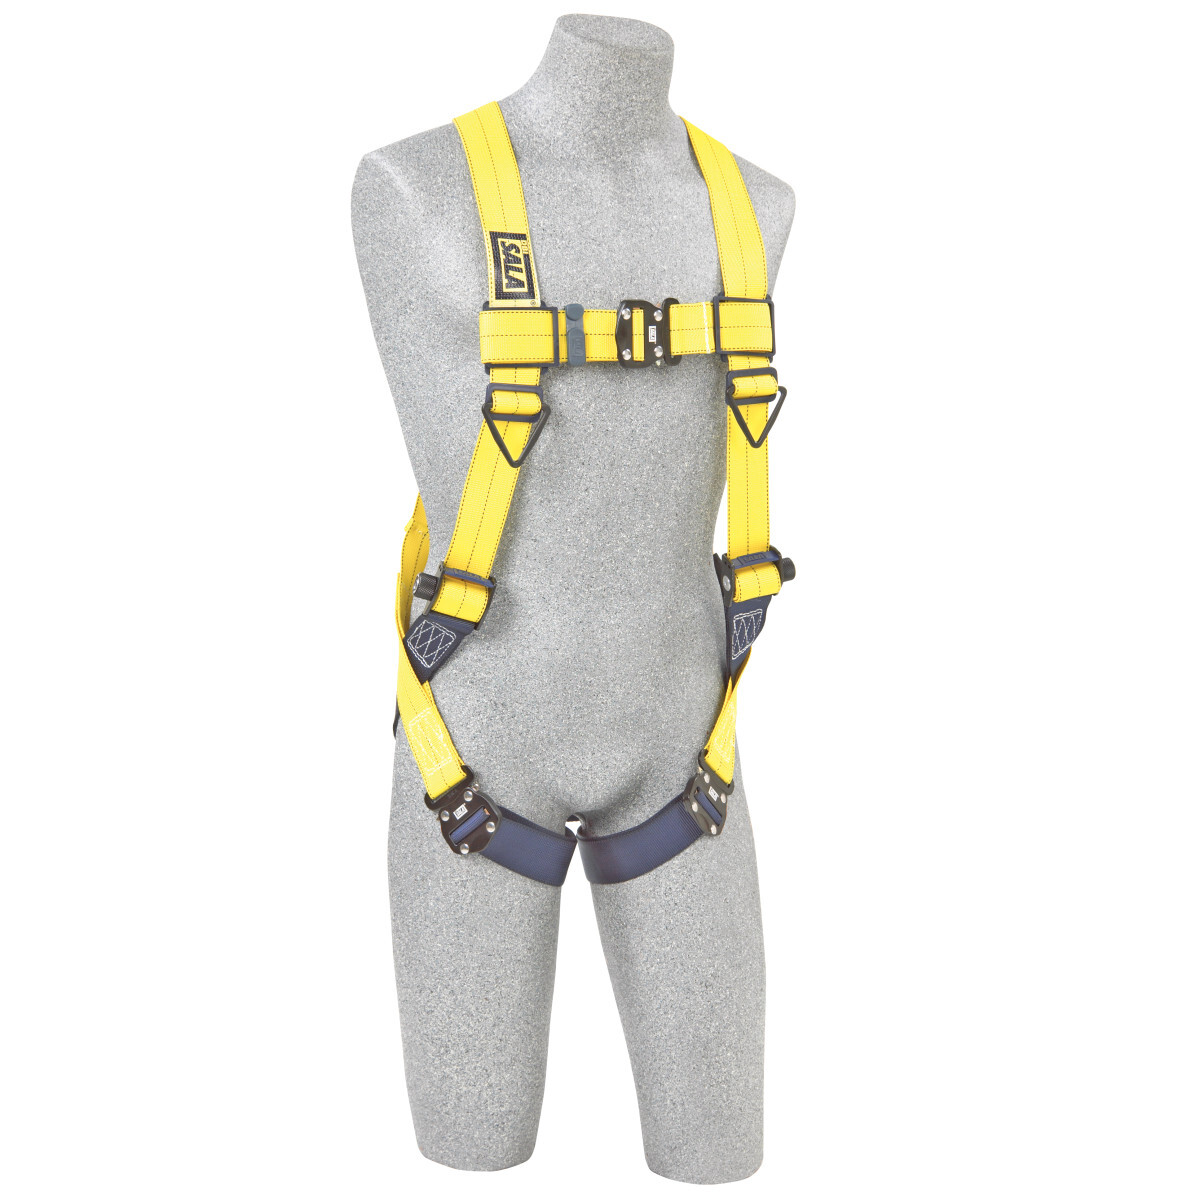 3M™ DBI-SALA® 2X Delta™ No-Tangle™ Full Body/Vest Style Harness With Back D-Ring And Tech-Lite™ Quick Connect Leg Strap Buckle